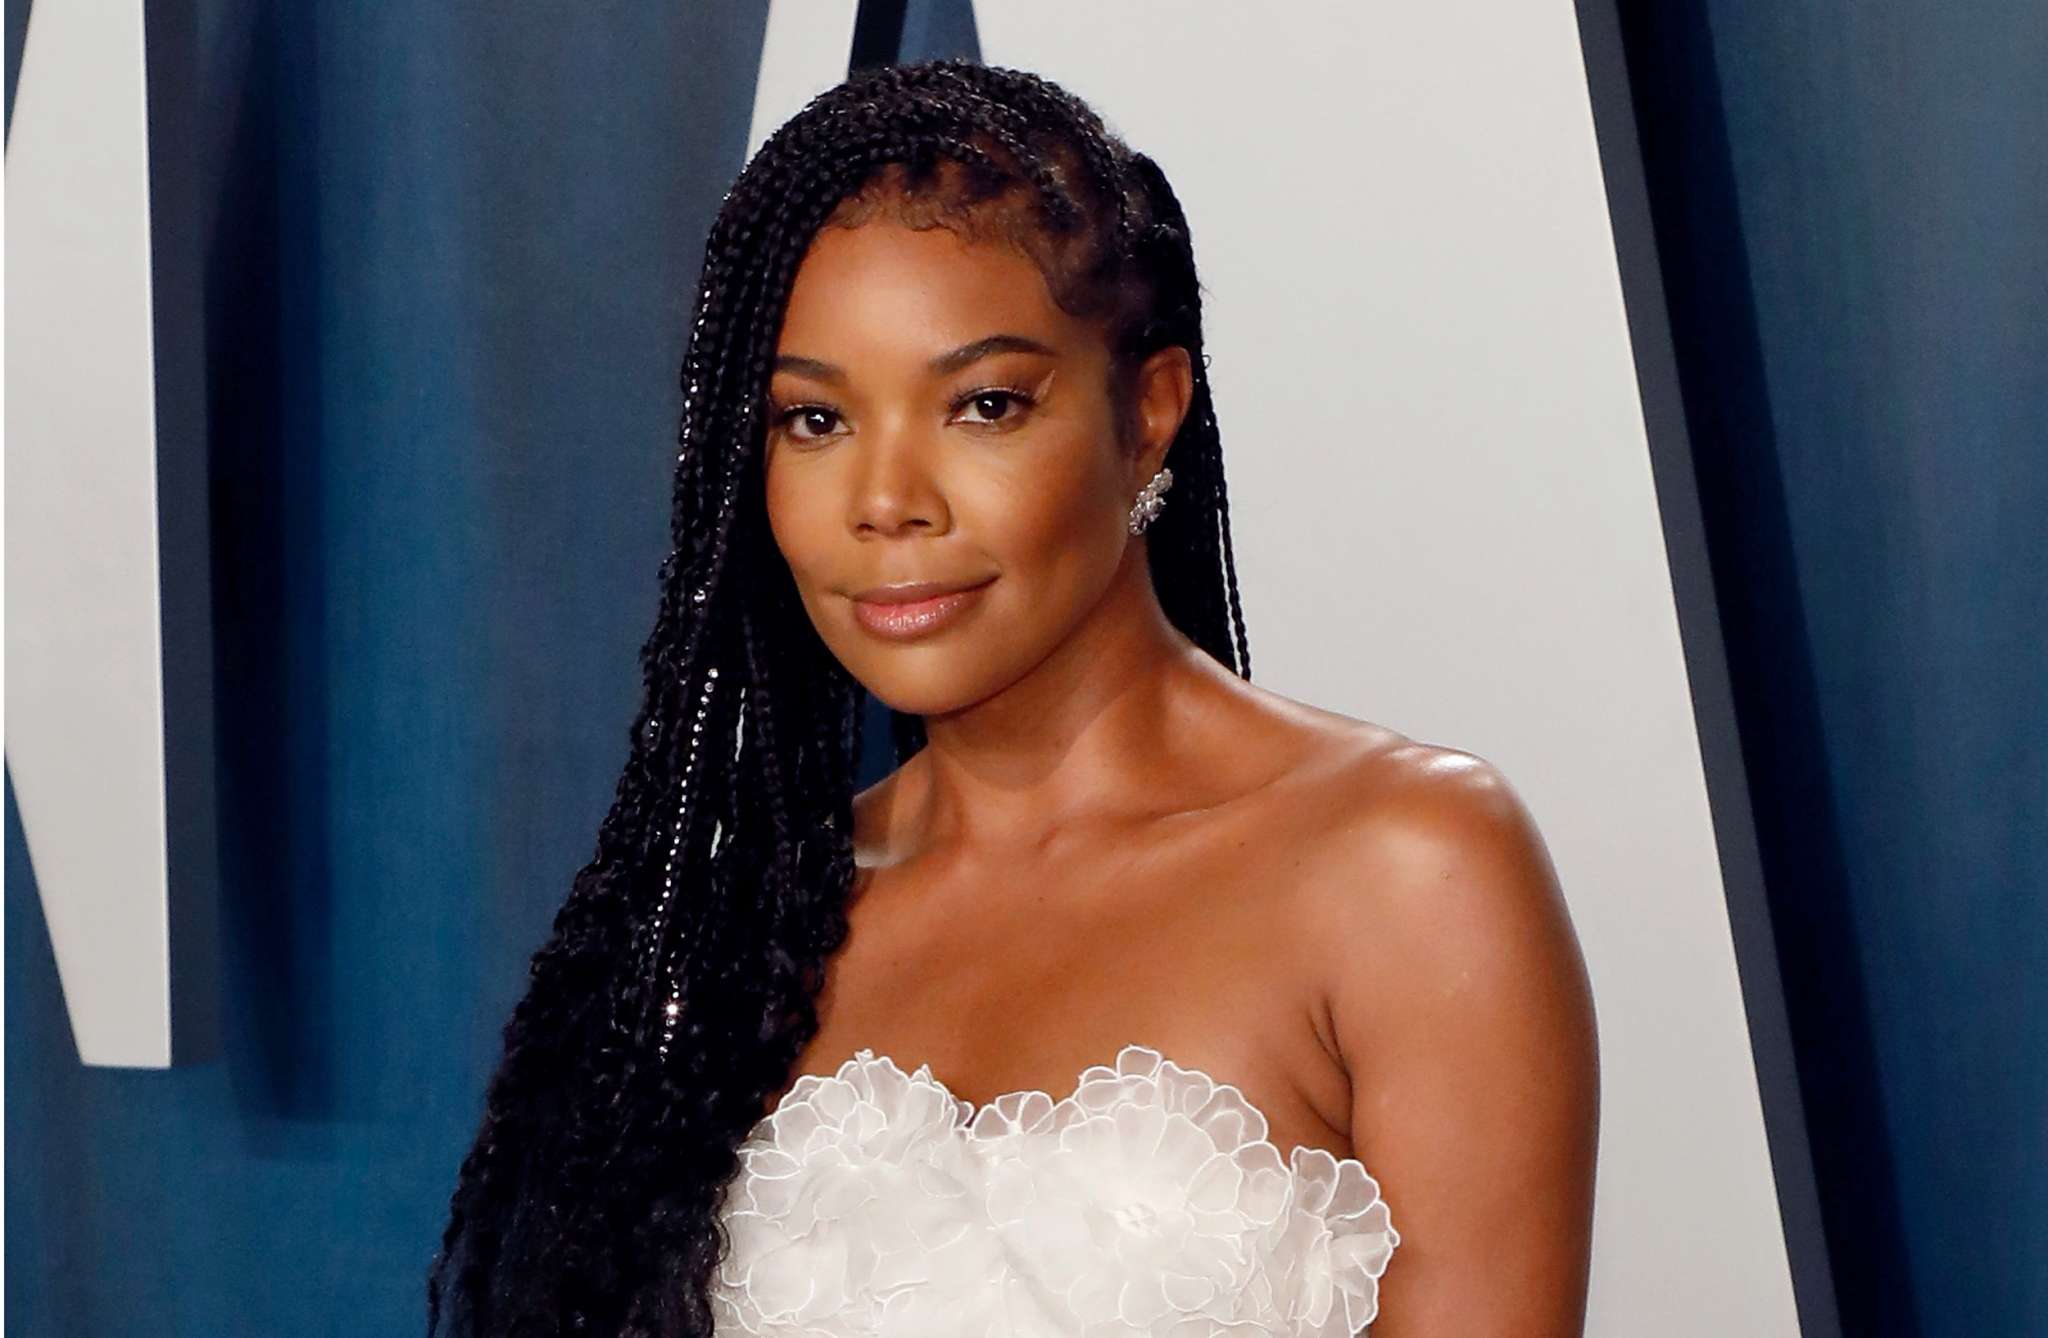 ”gabrielle-union-drops-an-important-message-about-her-shady-baby”